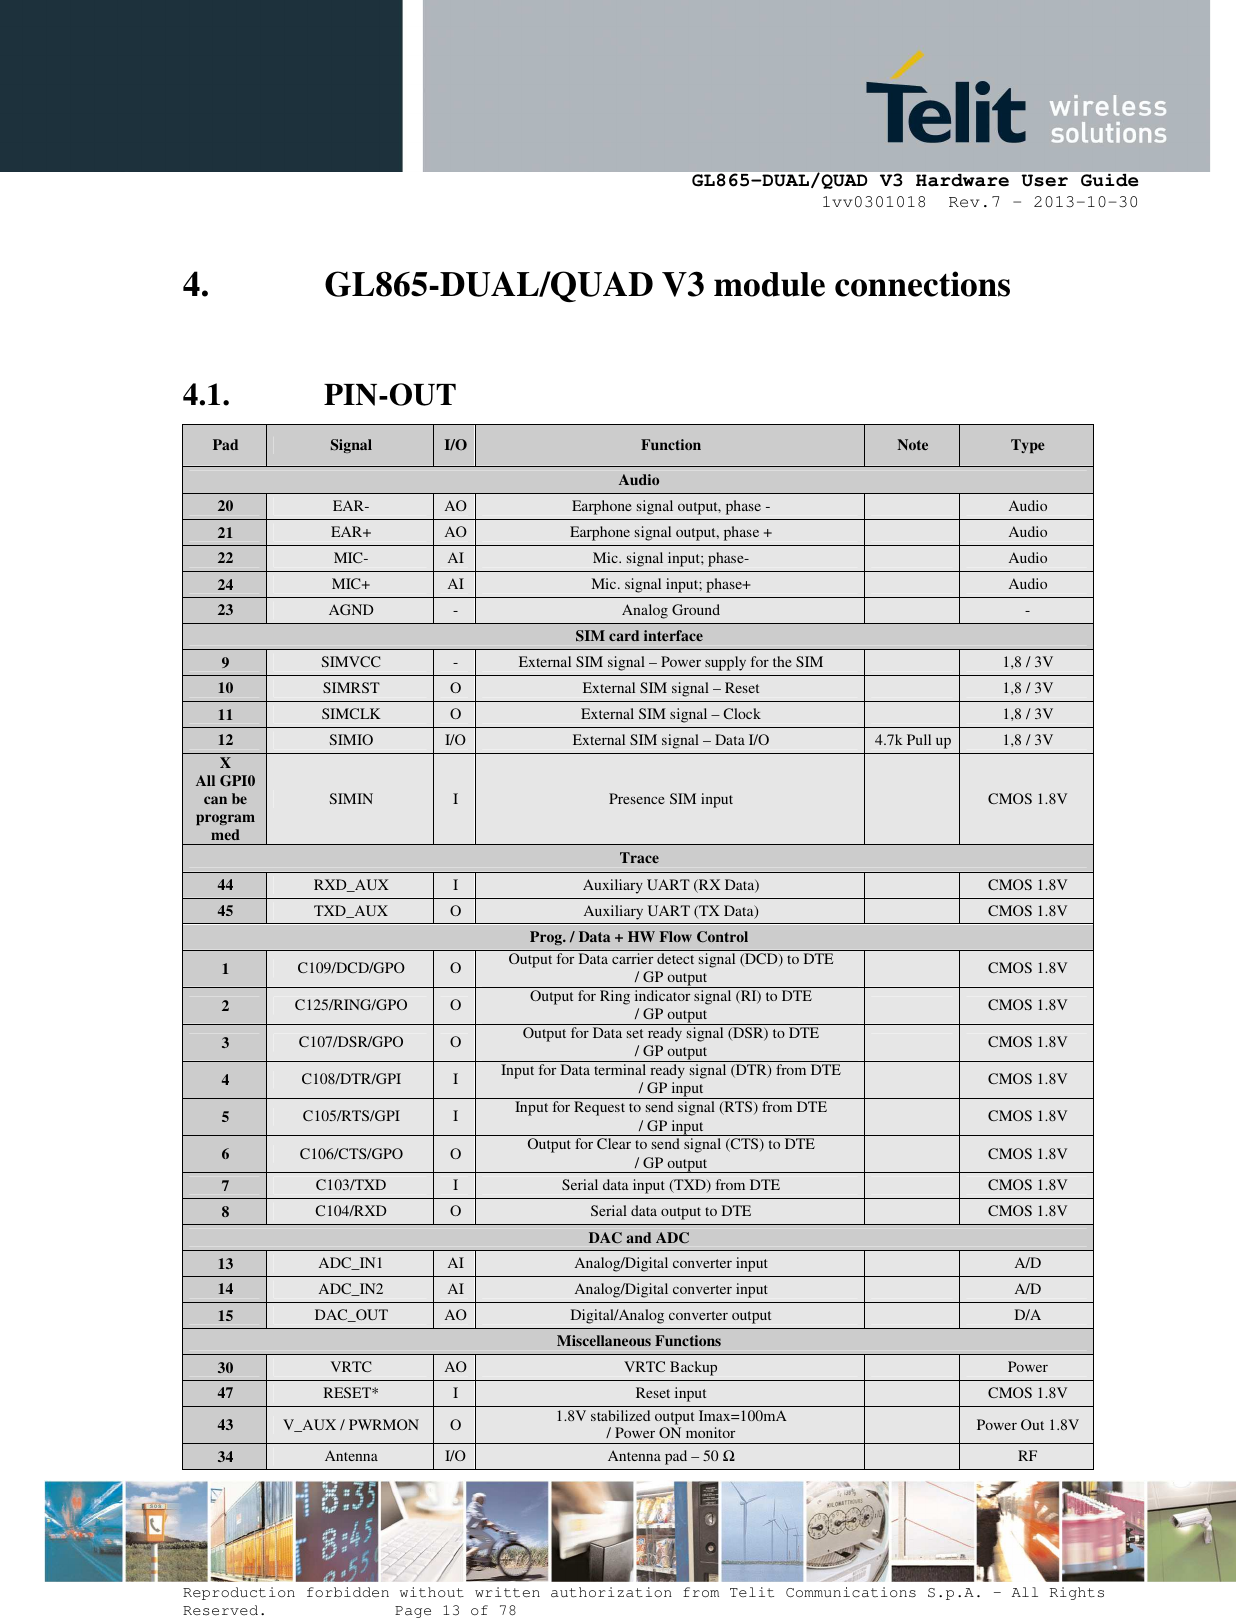      GL865-DUAL/QUAD V3 Hardware User Guide 1vv0301018  Rev.7 – 2013-10-30  Reproduction forbidden without written authorization from Telit Communications S.p.A. - All Rights Reserved.    Page 13 of 78 Mod. 0805 2011-07 Rev.2 4. GL865-DUAL/QUAD V3 module connections   4.1. PIN-OUT Pad  Signal  I/O Function  Note  Type Audio 20  EAR-  AO Earphone signal output, phase -    Audio 21  EAR+  AO Earphone signal output, phase +    Audio 22  MIC-  AI  Mic. signal input; phase-    Audio 24  MIC+  AI  Mic. signal input; phase+    Audio 23  AGND  -  Analog Ground    - SIM card interface 9  SIMVCC  -  External SIM signal – Power supply for the SIM    1,8 / 3V 10  SIMRST  O  External SIM signal – Reset    1,8 / 3V 11  SIMCLK  O  External SIM signal – Clock    1,8 / 3V 12  SIMIO  I/O  External SIM signal – Data I/O  4.7k Pull up 1,8 / 3V X All GPI0 can be  programmed SIMIN  I  Presence SIM input    CMOS 1.8V Trace 44  RXD_AUX  I  Auxiliary UART (RX Data)    CMOS 1.8V 45  TXD_AUX  O  Auxiliary UART (TX Data)    CMOS 1.8V Prog. / Data + HW Flow Control 1  C109/DCD/GPO  O  Output for Data carrier detect signal (DCD) to DTE  / GP output    CMOS 1.8V 2  C125/RING/GPO  O  Output for Ring indicator signal (RI) to DTE / GP output    CMOS 1.8V 3  C107/DSR/GPO  O  Output for Data set ready signal (DSR) to DTE / GP output    CMOS 1.8V 4  C108/DTR/GPI  I  Input for Data terminal ready signal (DTR) from DTE / GP input    CMOS 1.8V 5  C105/RTS/GPI  I  Input for Request to send signal (RTS) from DTE / GP input    CMOS 1.8V 6  C106/CTS/GPO  O  Output for Clear to send signal (CTS) to DTE / GP output    CMOS 1.8V 7  C103/TXD  I  Serial data input (TXD) from DTE    CMOS 1.8V 8  C104/RXD  O  Serial data output to DTE    CMOS 1.8V DAC and ADC 13  ADC_IN1  AI  Analog/Digital converter input    A/D 14  ADC_IN2  AI  Analog/Digital converter input    A/D 15  DAC_OUT  AO Digital/Analog converter output    D/A Miscellaneous Functions 30  VRTC  AO VRTC Backup     Power 47  RESET*  I  Reset input    CMOS 1.8V 43  V_AUX / PWRMON  O  1.8V stabilized output Imax=100mA / Power ON monitor     Power Out 1.8V 34  Antenna  I/O  Antenna pad – 50 Ω    RF 